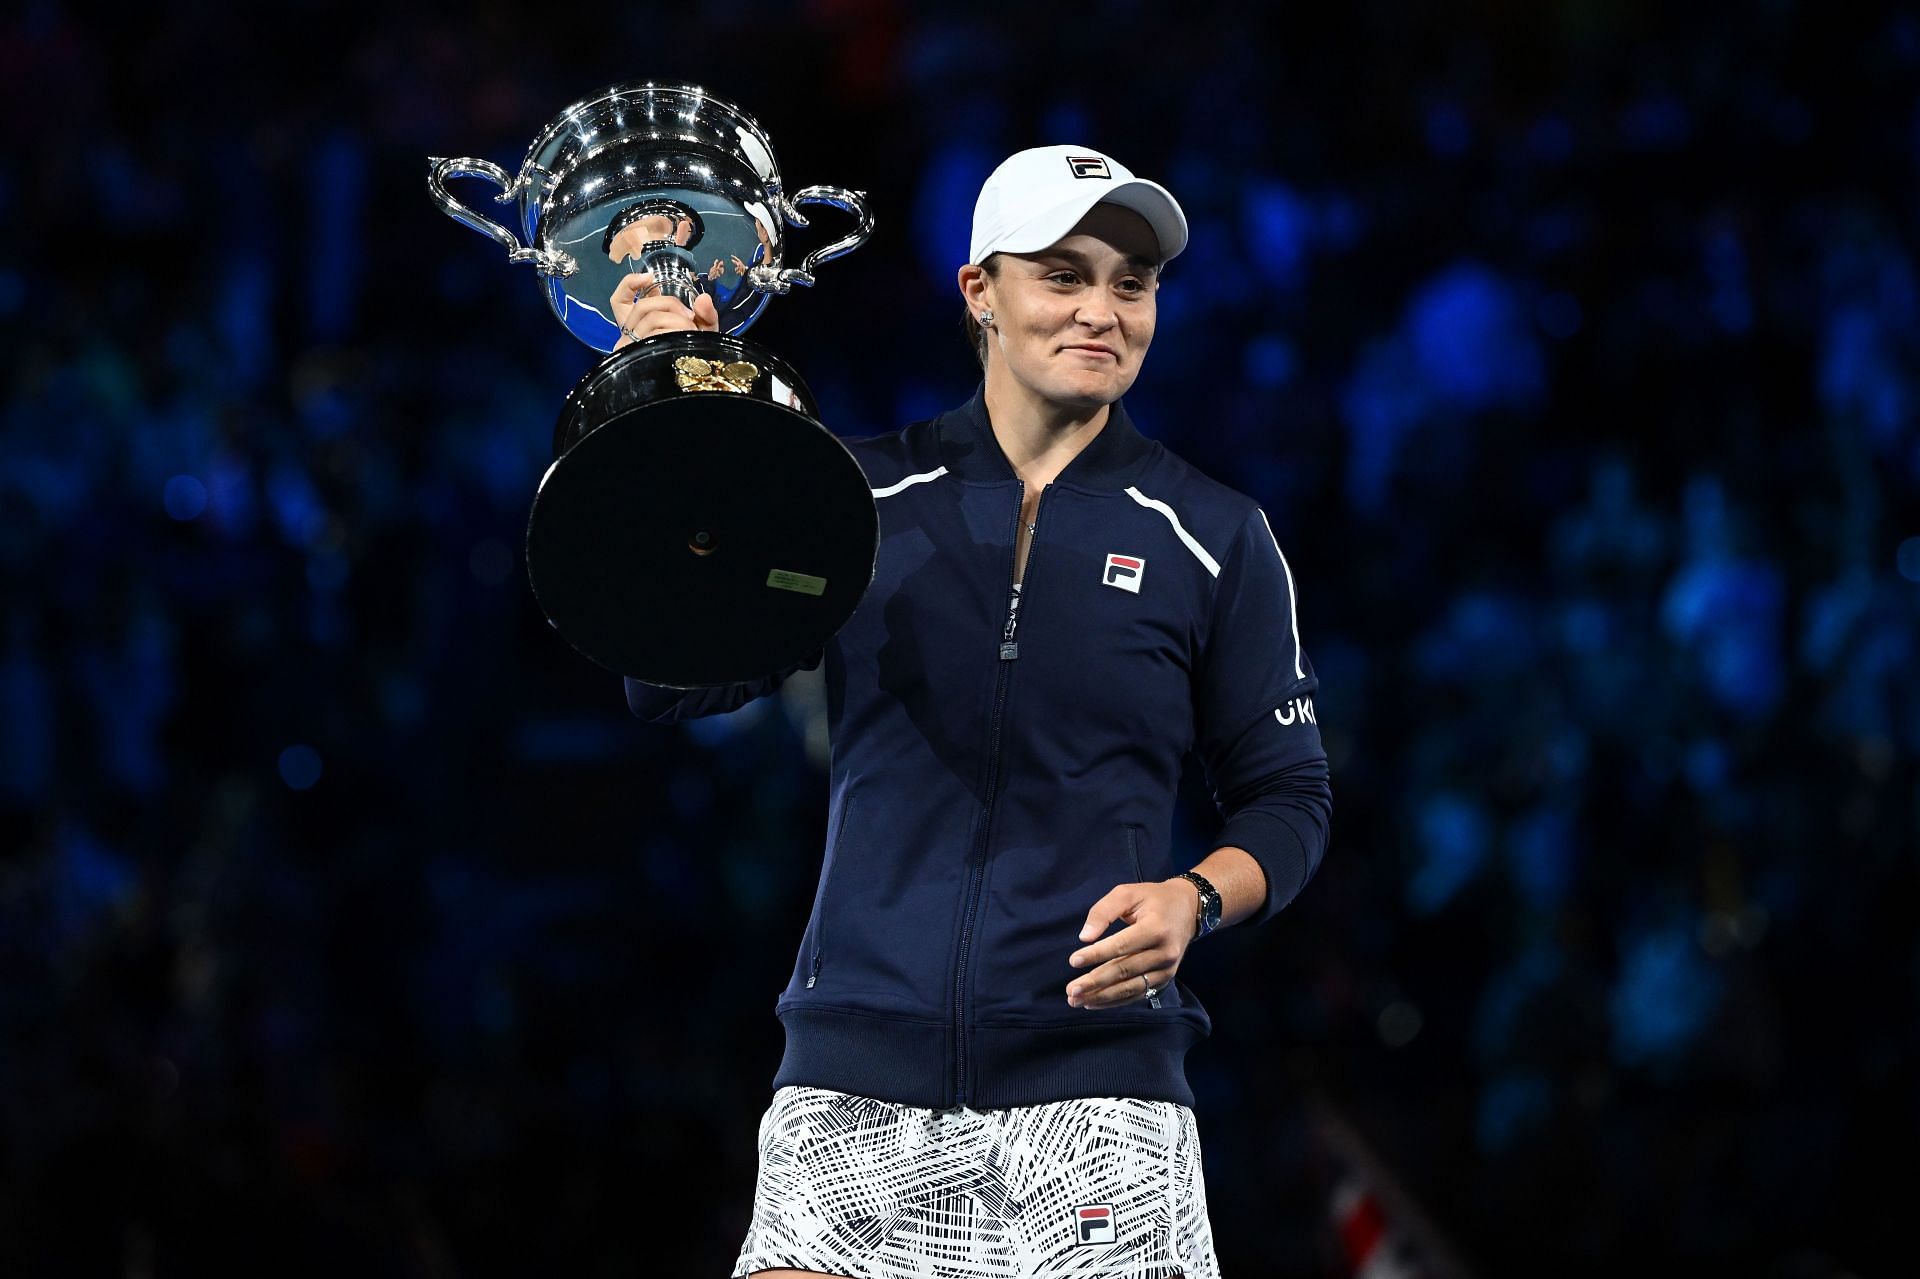 Ashleigh Barty has now spent 108 consecutve weeks at the top of the WTA rankings